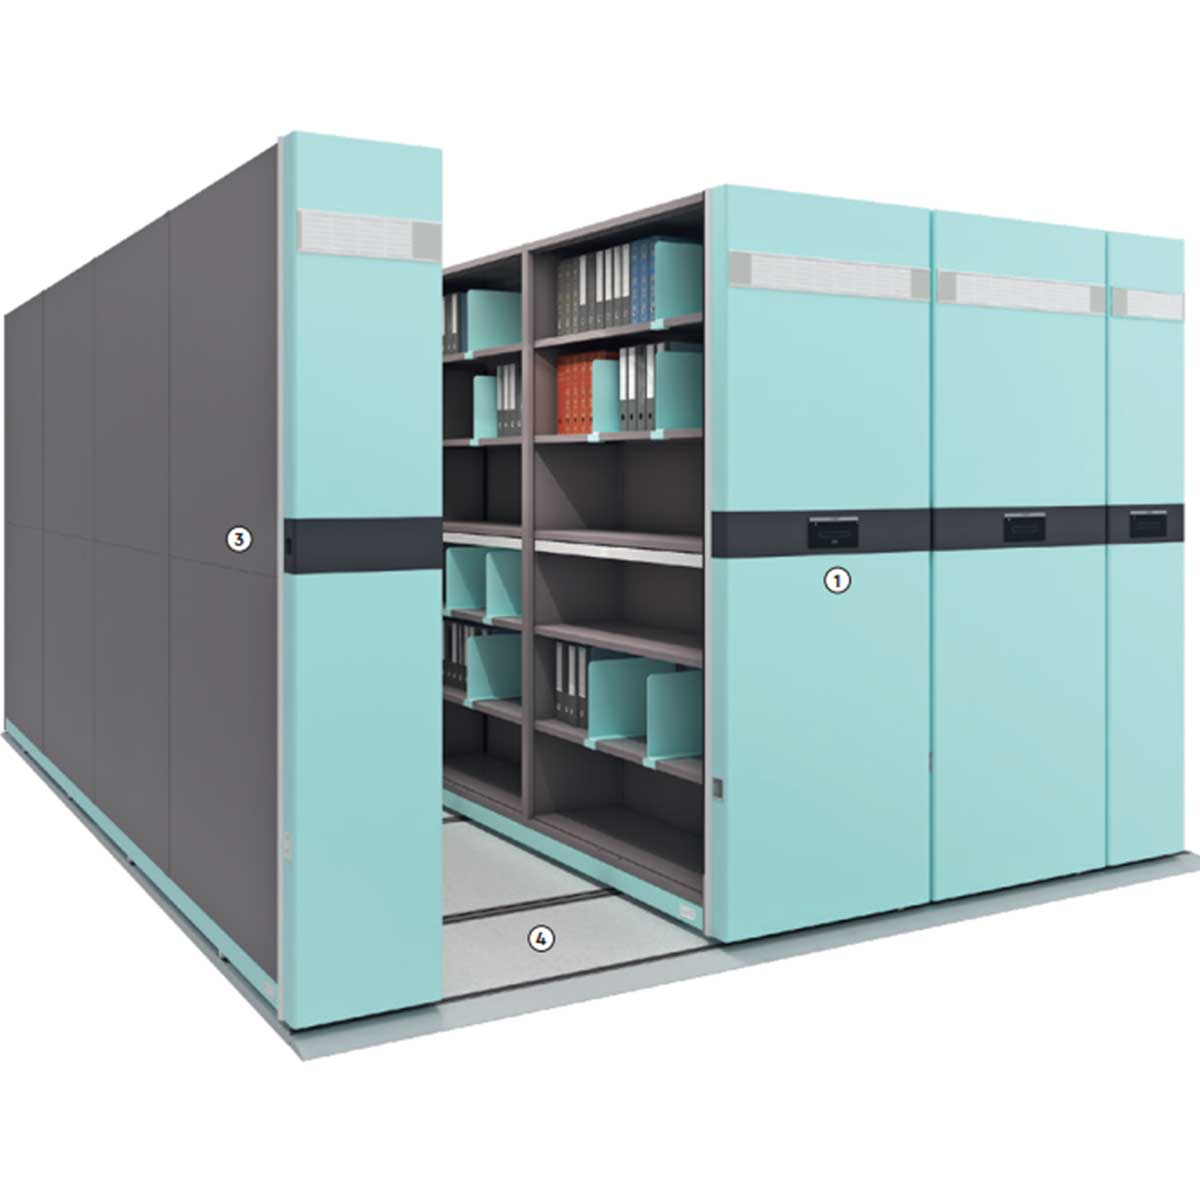 Mobile compactor storage Manufacturers, Suppliers in Rohini Sector 5